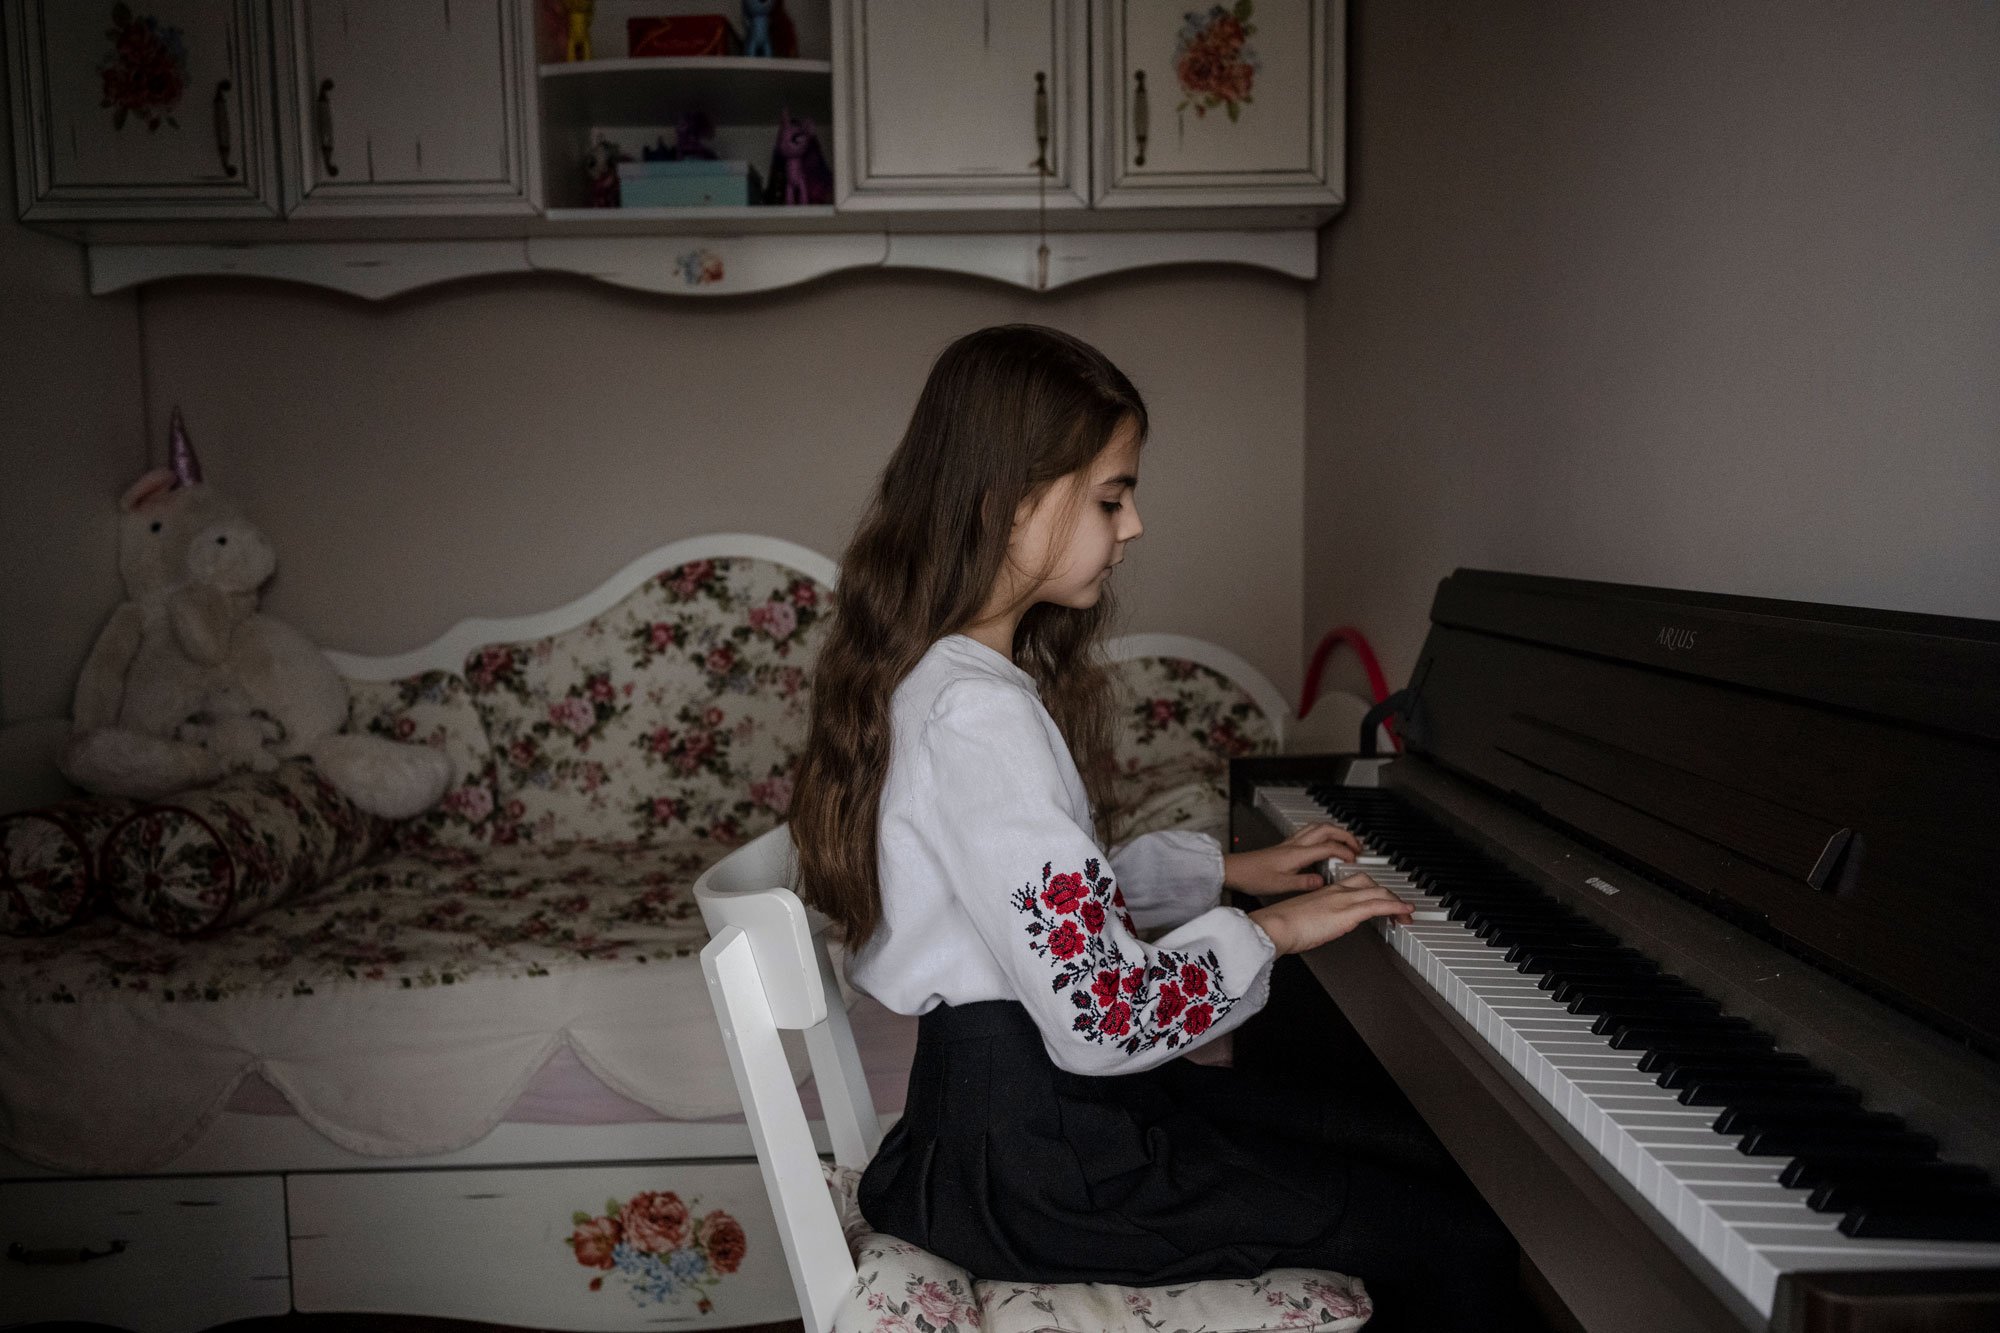  Eva Sokolenko, 9, practices on her electronic piano on Orthodox Christmas Day in Kyiv, Ukraine, January 6, 2023. In her free time after school Eva plays piano, dances, draws, paints, and practices acrobatics. 